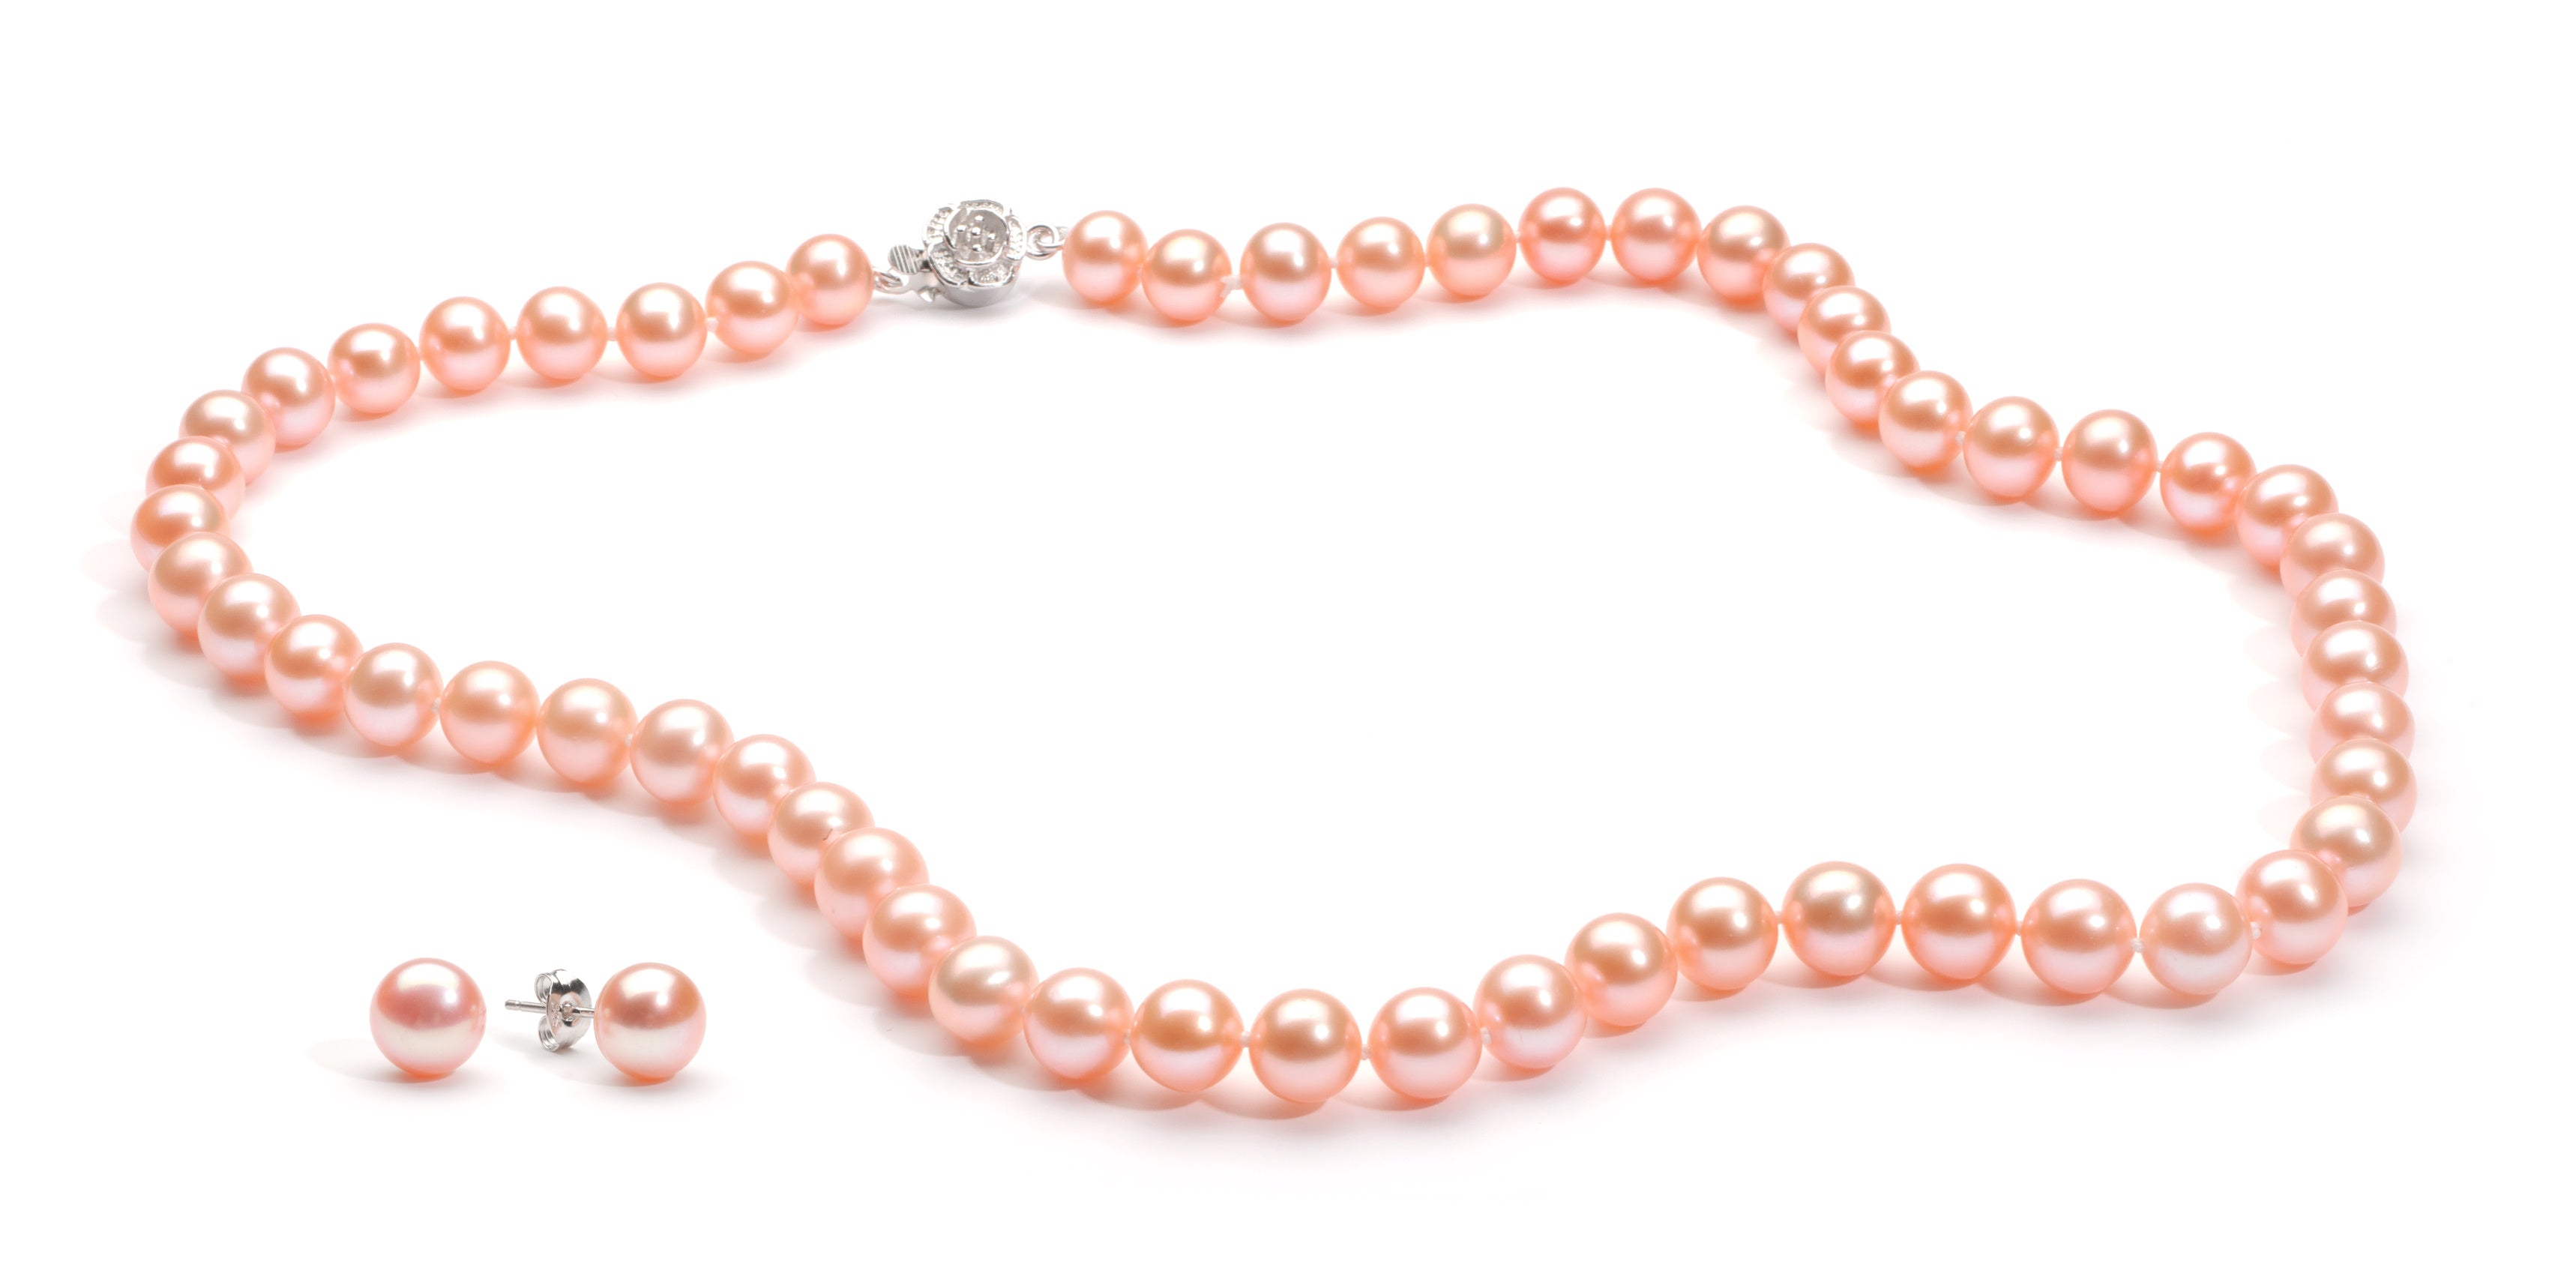 Necklace/Earrings Set 8.0-9.0 mm Pink Freshwater Pearls